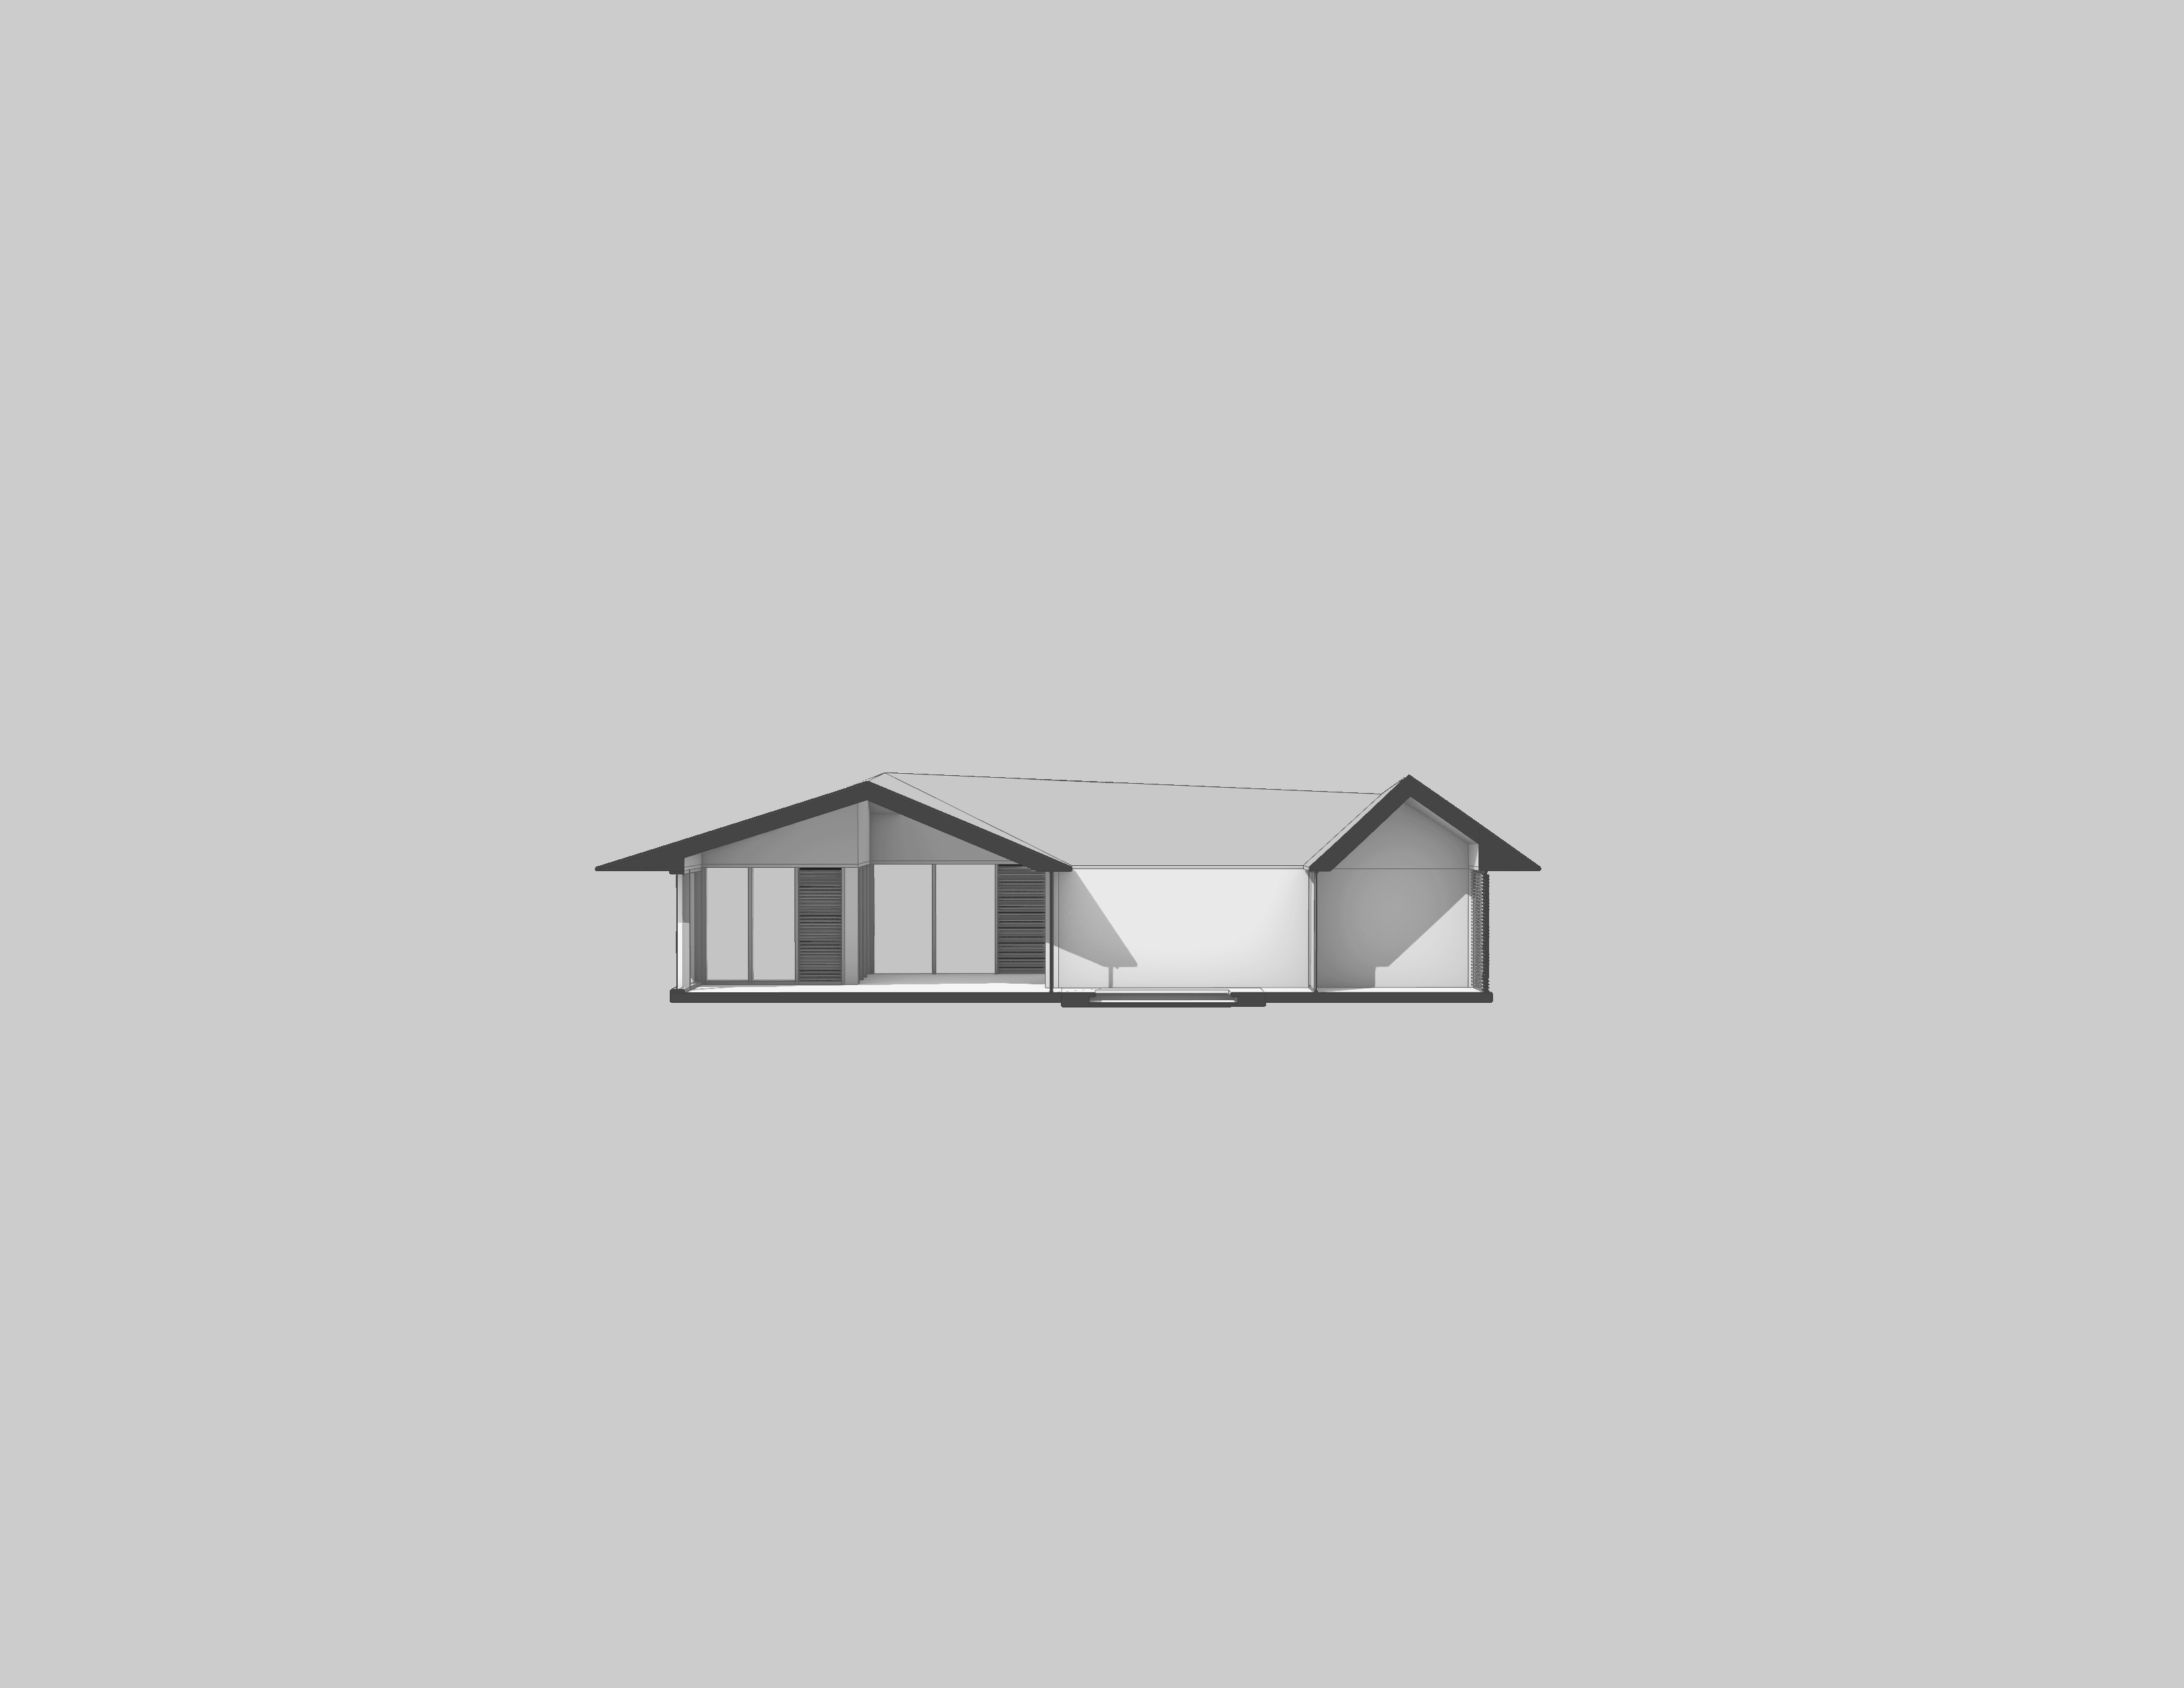 Kukuihaele, a new work in progress with Patrick Tighe Architecture. Working on roof scheme iterations for this house on the northern coast of Hawaii.